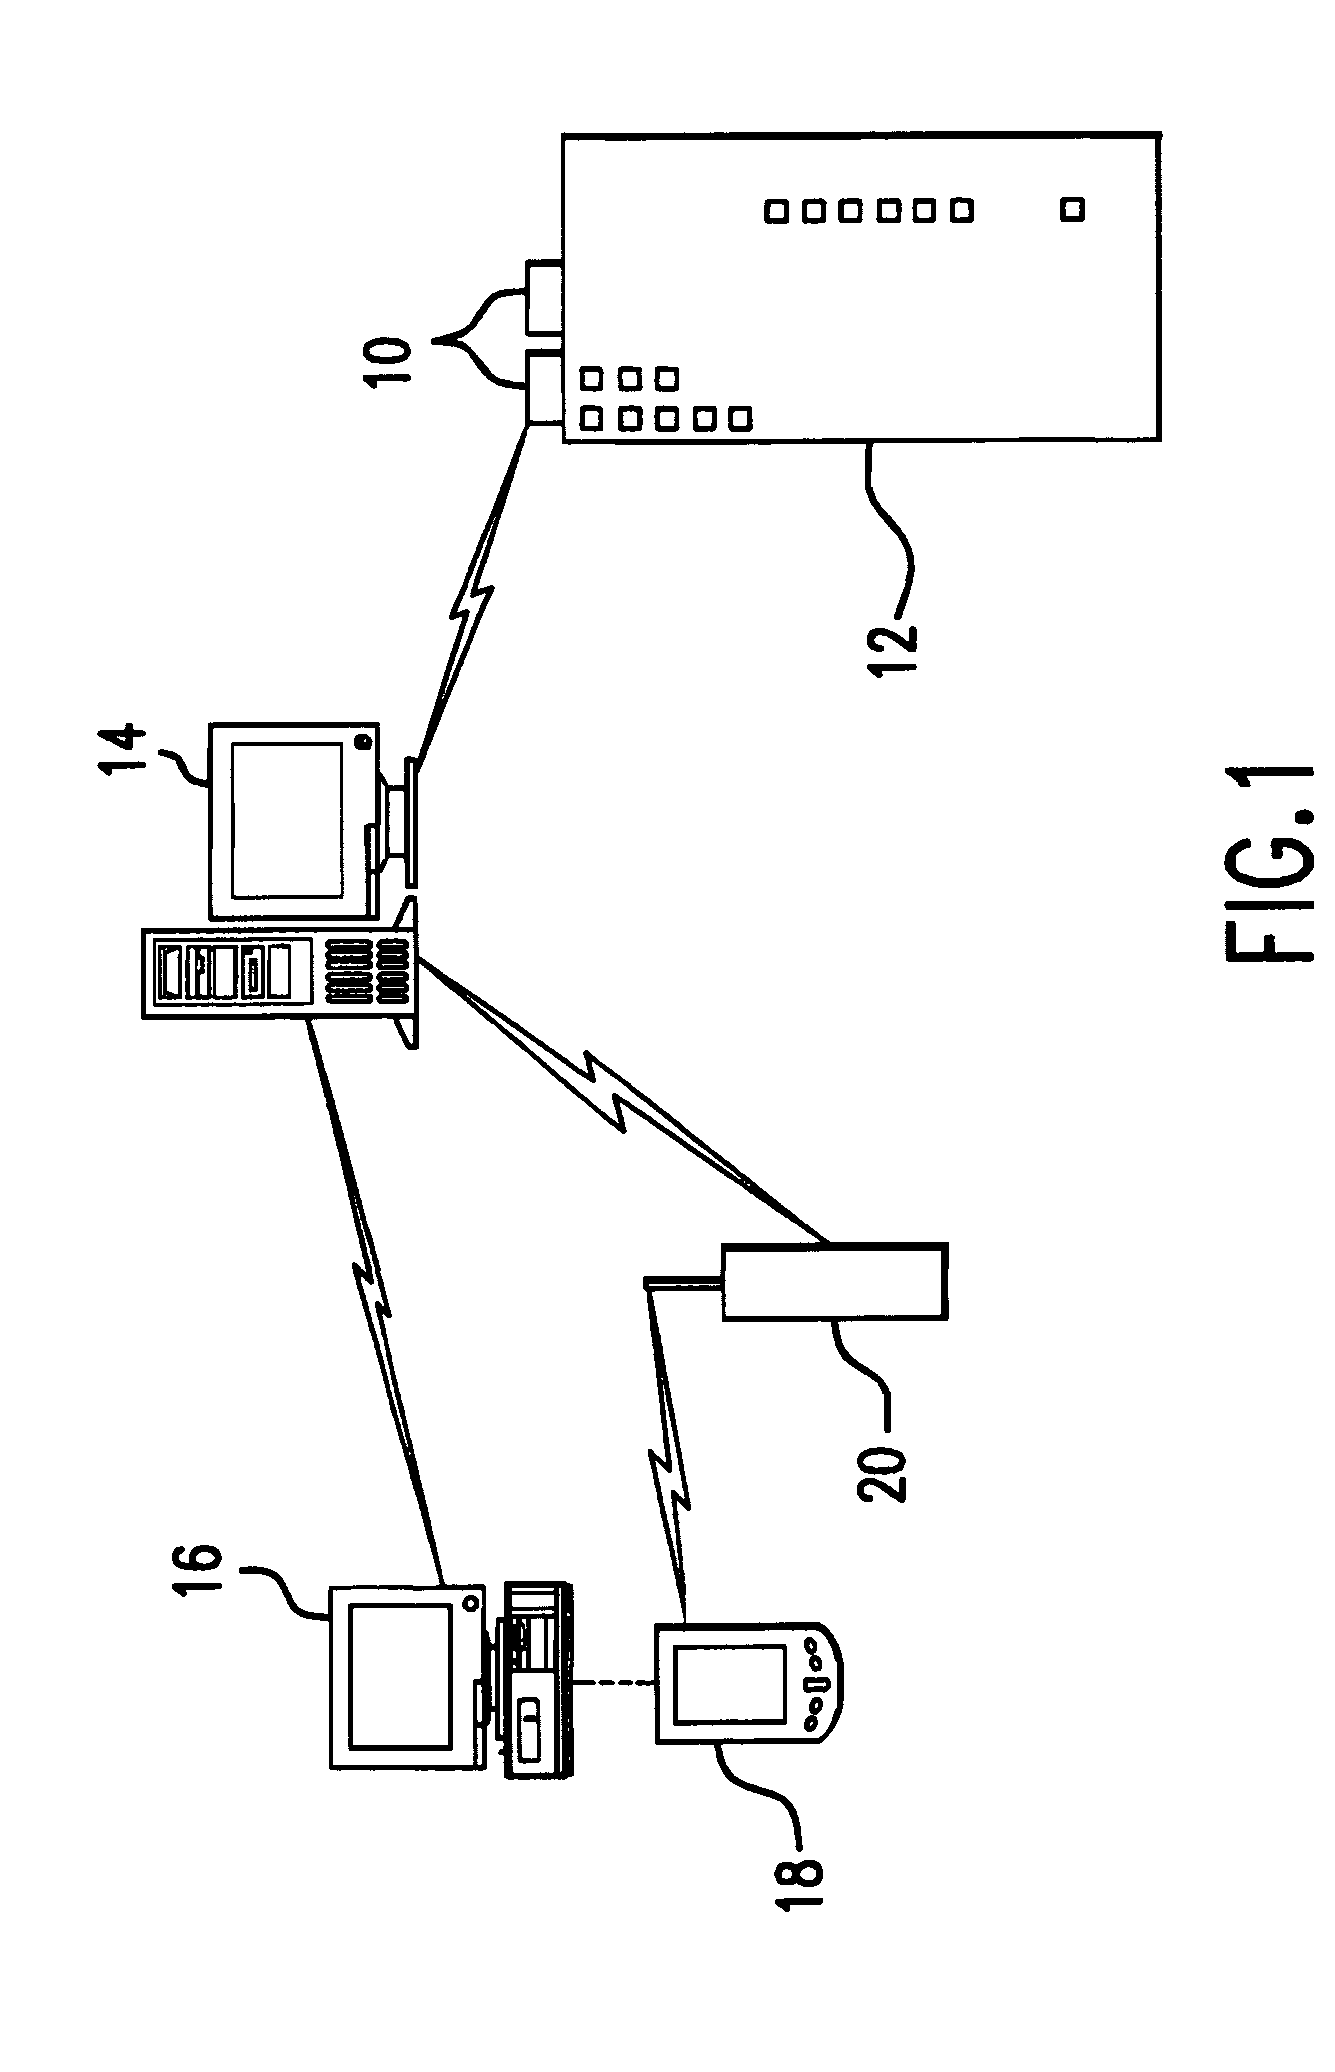 Method and system for evaluating the efficiency of an air conditioning apparatus